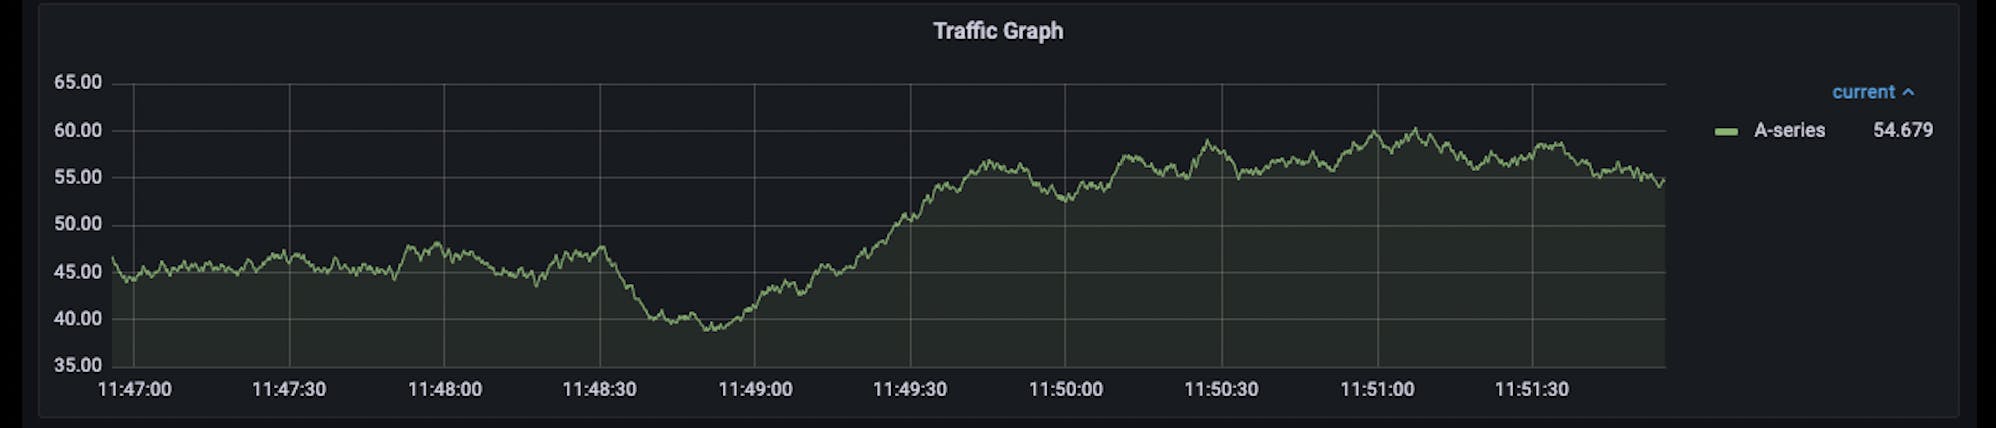 Example grafana graph illustrating increase in site traffic over time. Does not represent Branching Minds data. 